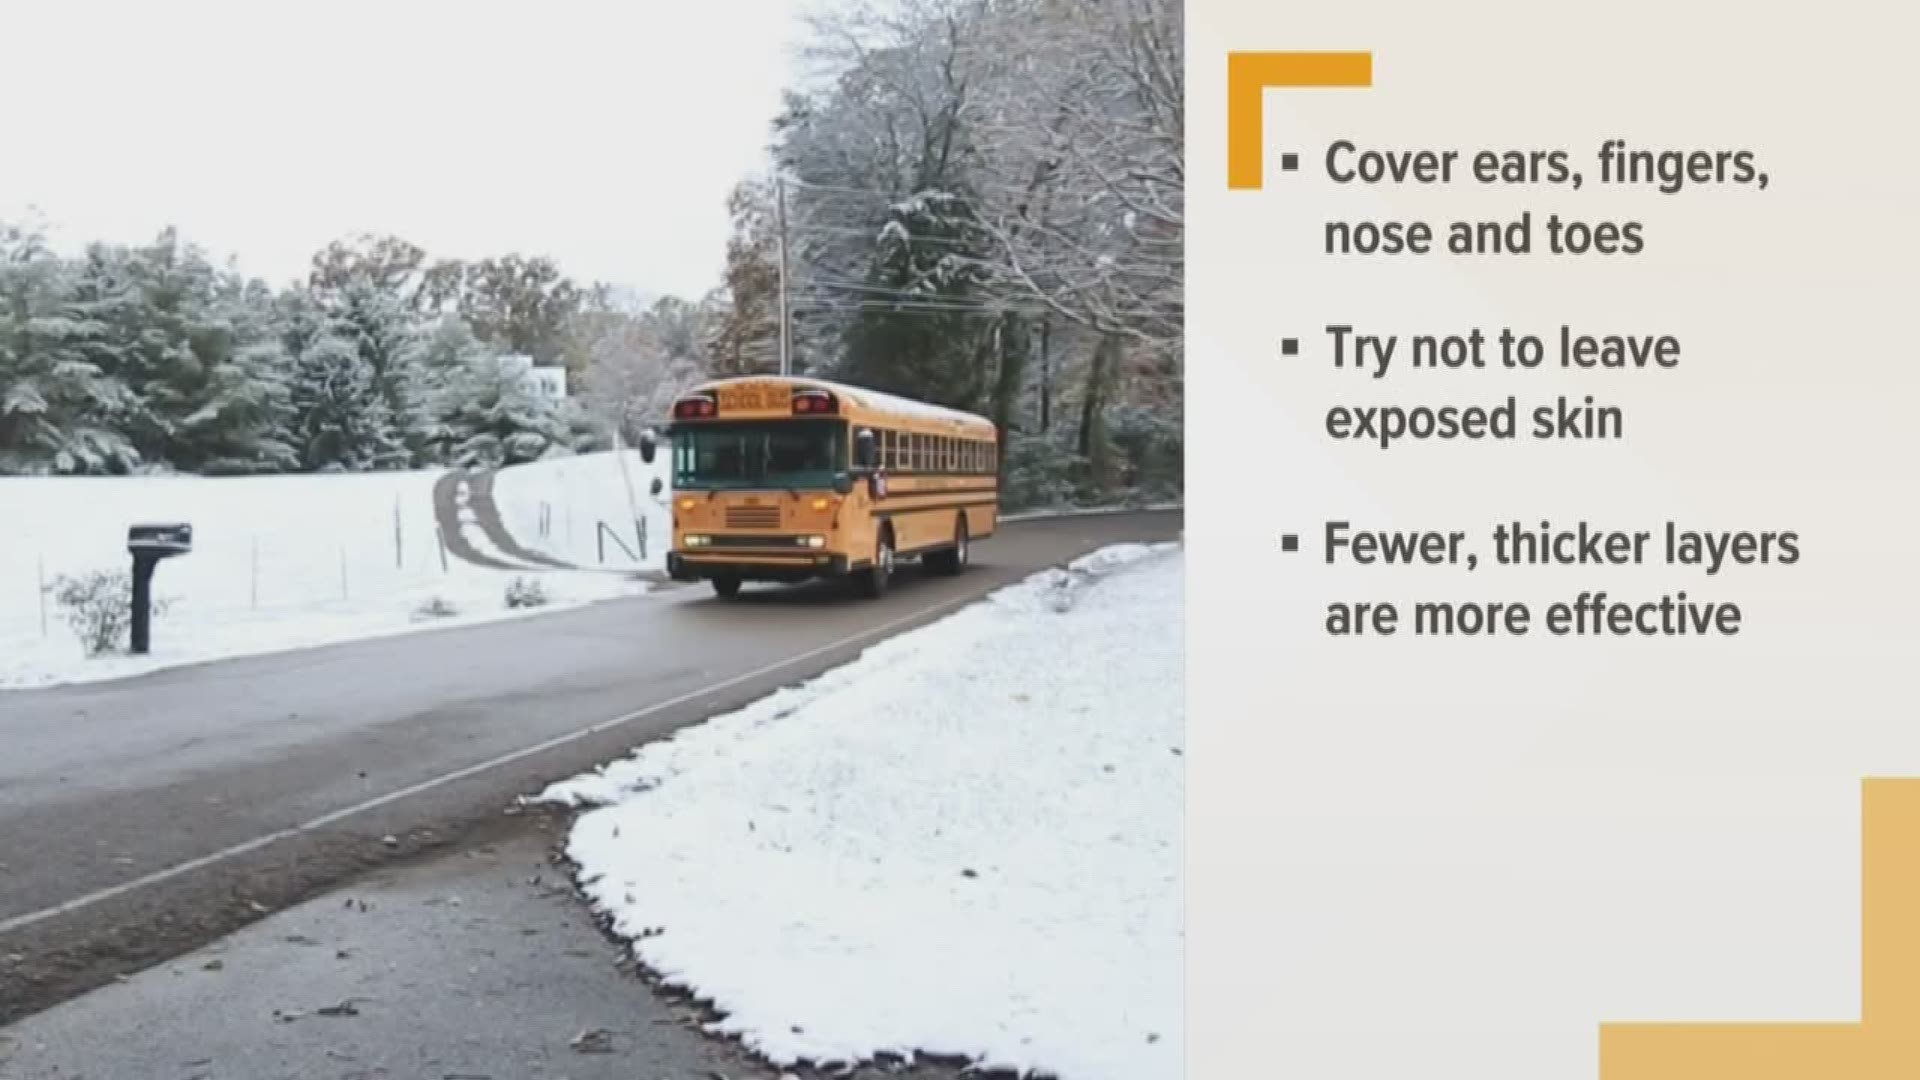 Here's how to keep your child warm while they wait for the school bus during a cold morning.